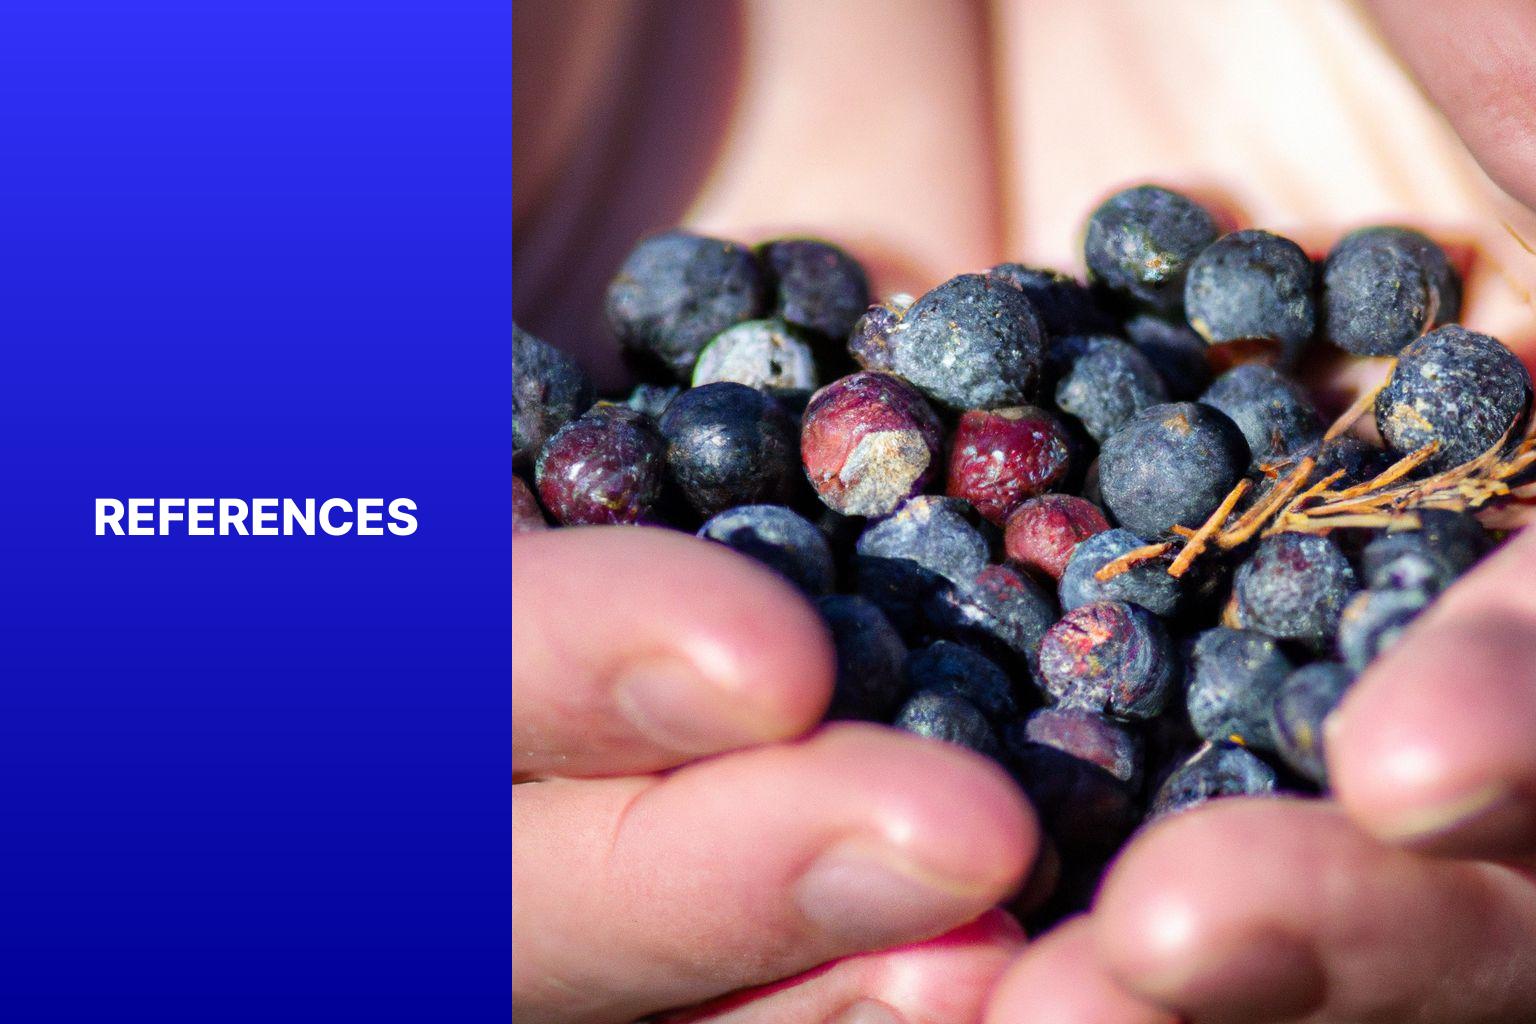 References - The Health Benefits of Juniper Berries: Explore the various health benefits of consuming juniper berries, including their effects on digestion, immunity, and more. 